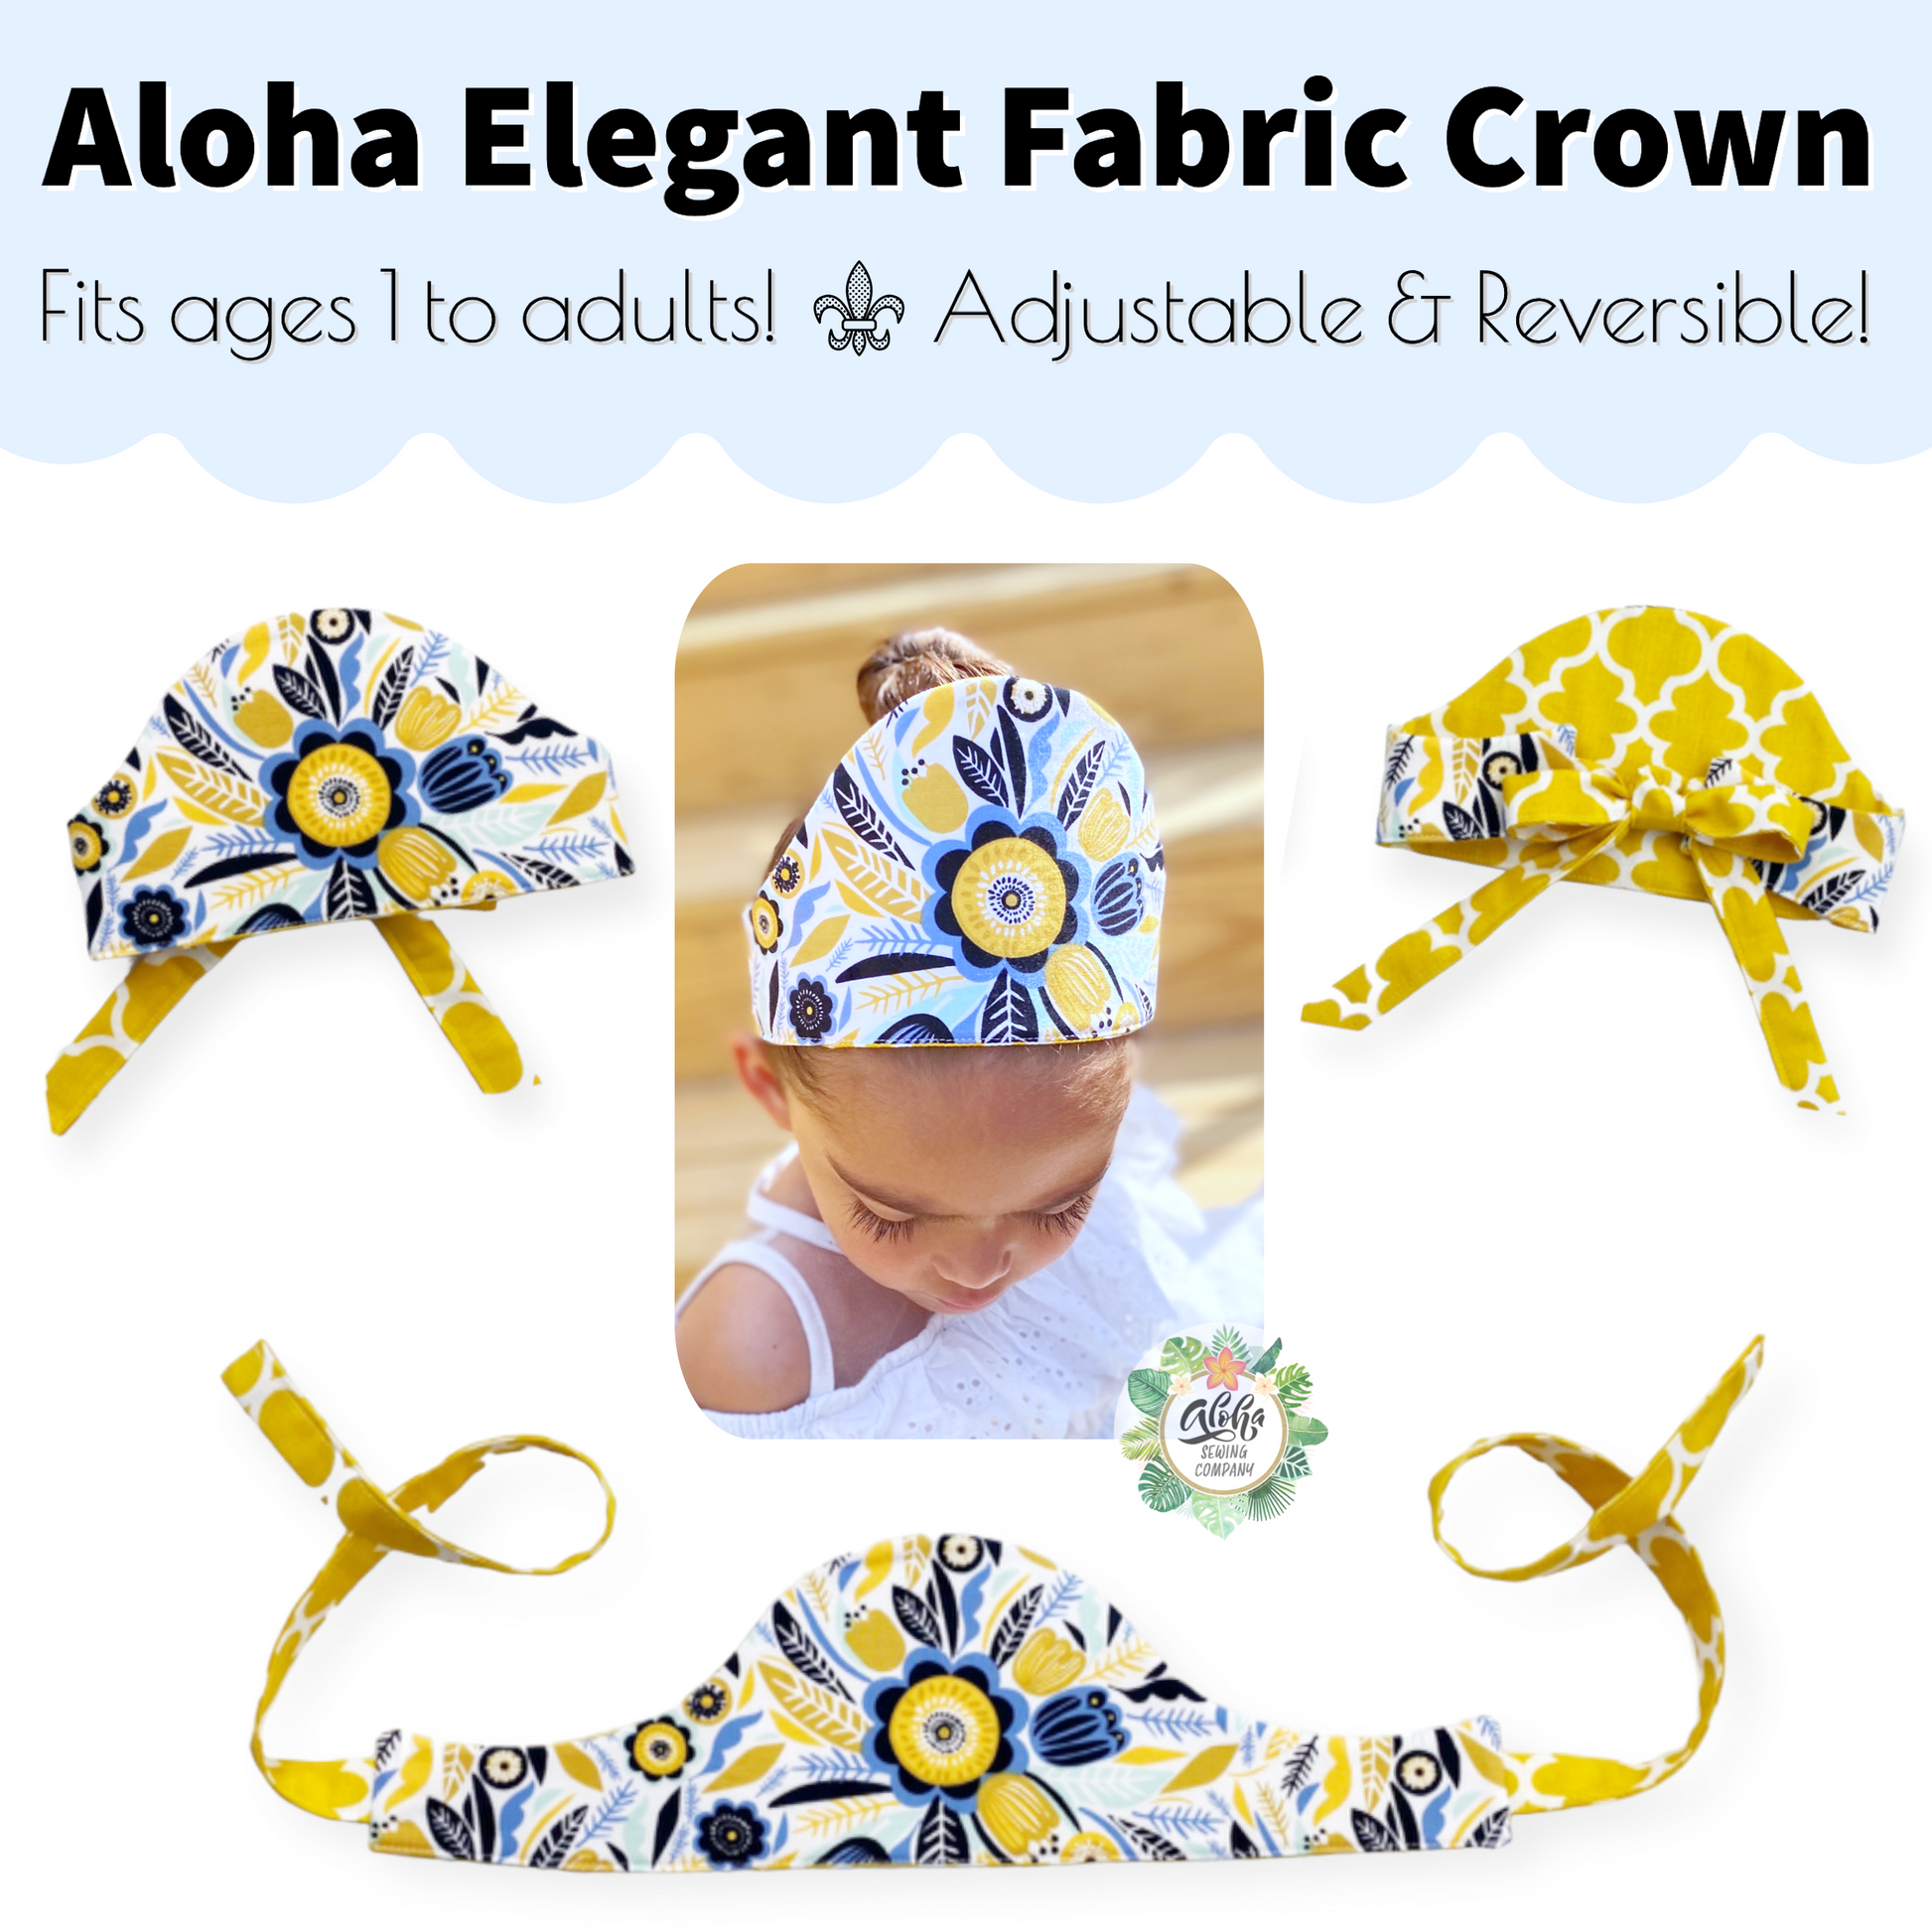 How to sew easy beginners DIY fabric crowns for birthday party favors, princess or prince, king or queen fabric crowns collection by aloha sewing company. Tutorial video and printable sewing pattern included. Great Halloween or Renaissance crowns to sew.